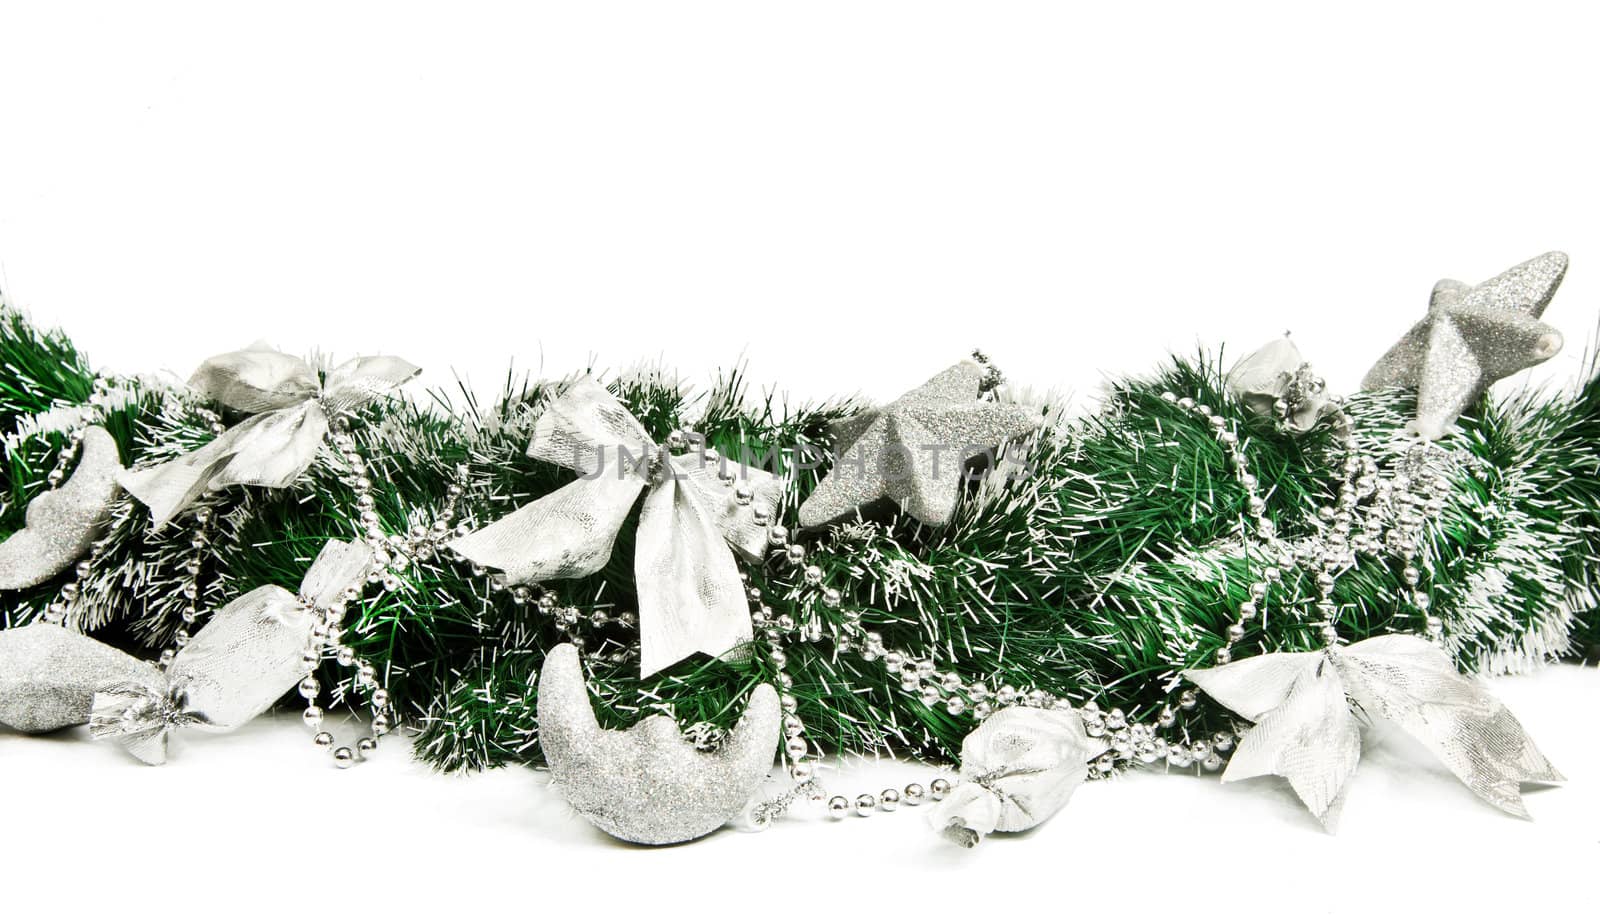 Part of Christmas wreath with decorations by RawGroup